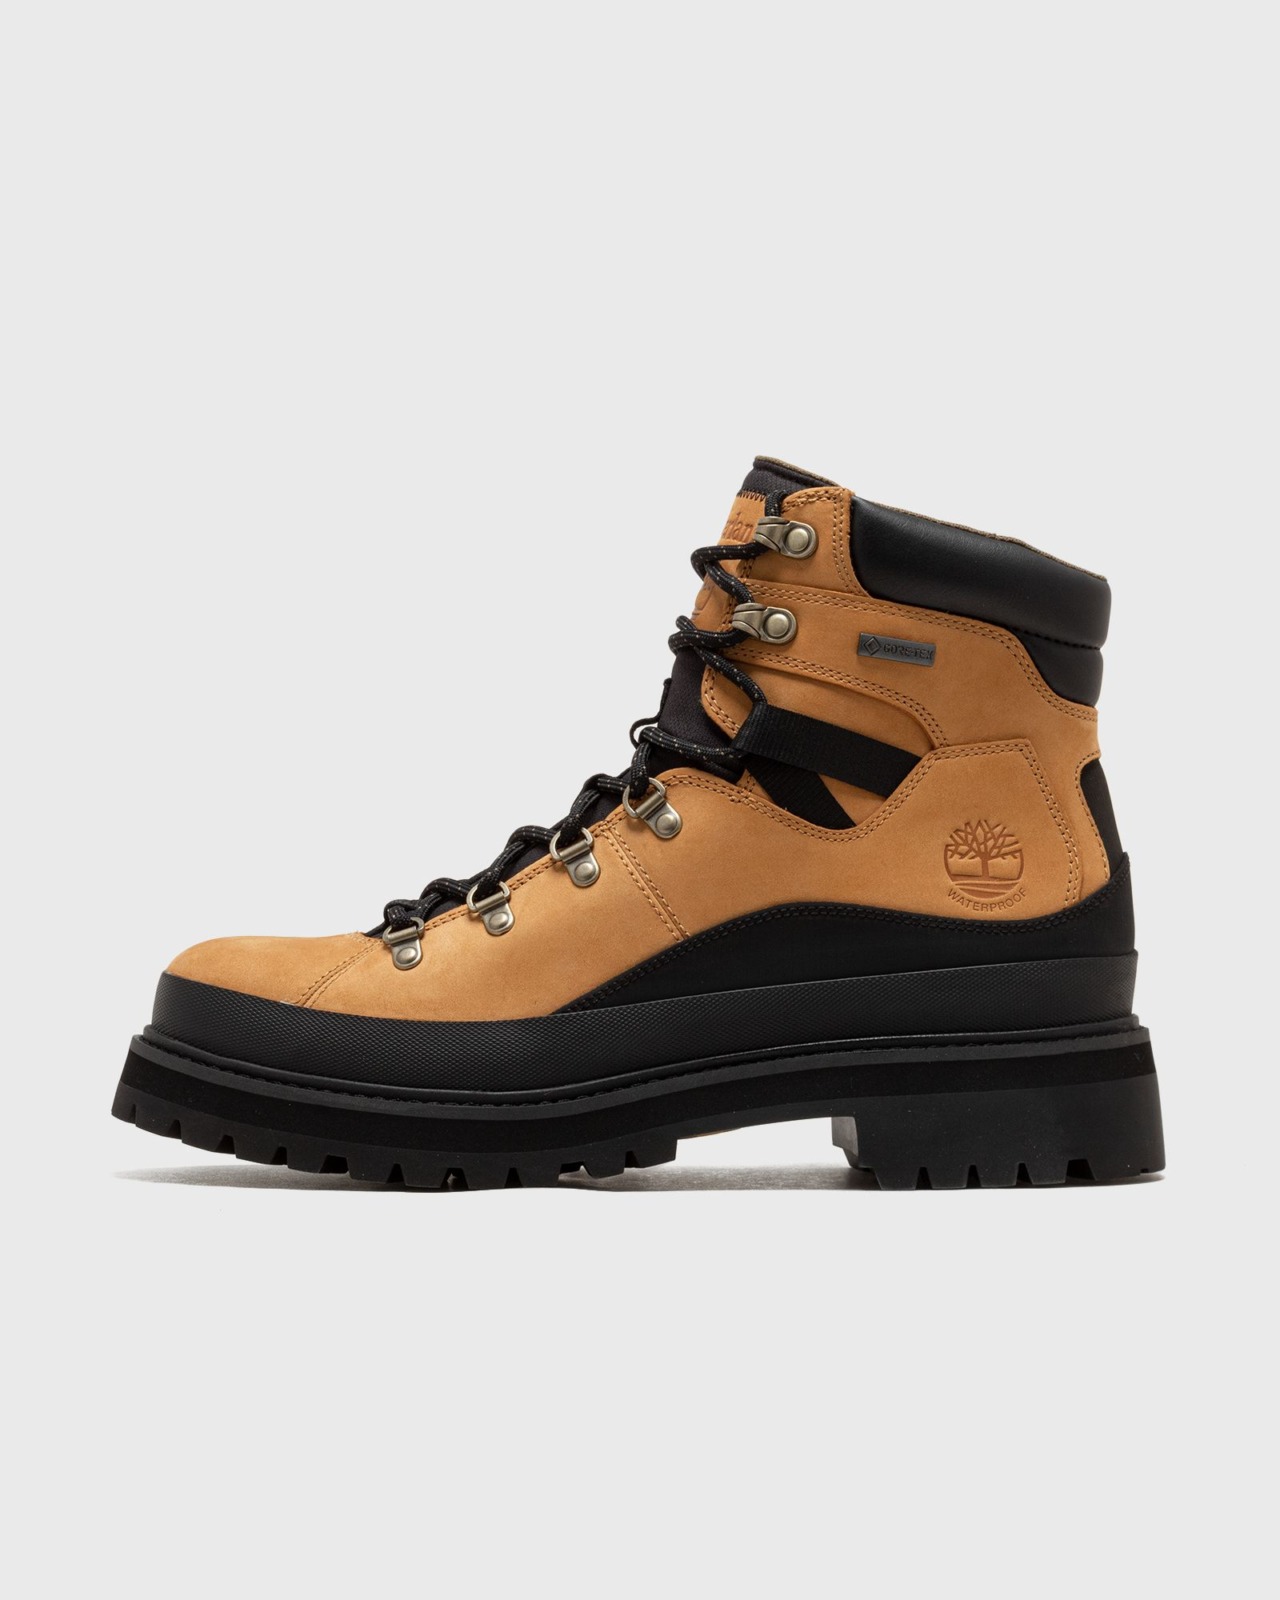 Timberland - Men's Boots Brown by Bstn GOOFASH